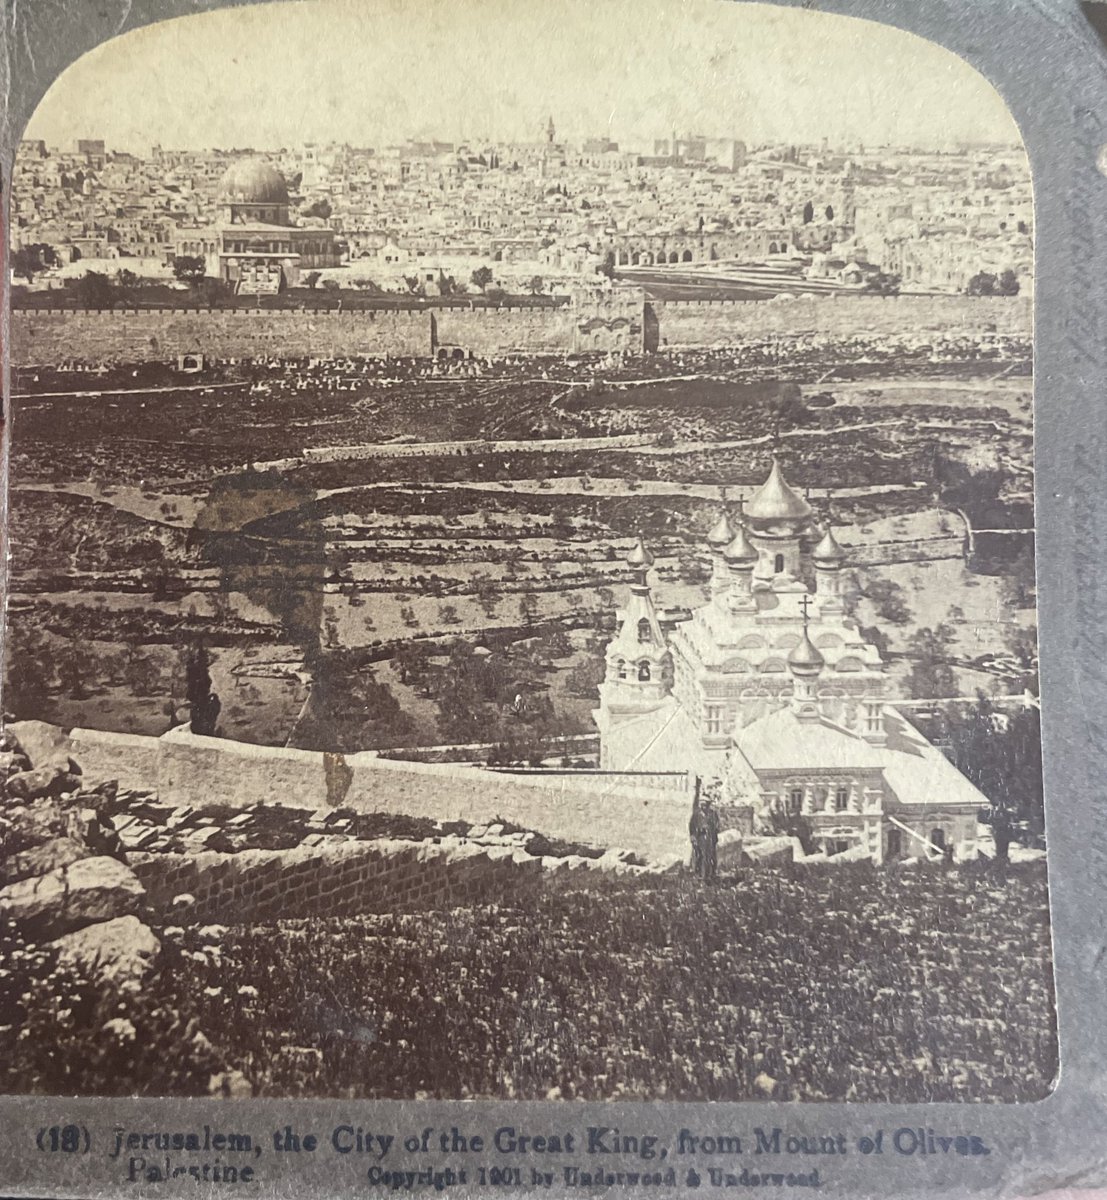 found this photo of Palestine at a vintage shop in North Dakota a couple weeks ago. “Jerusalem, Palestine. the city of the great king, from the Mount of Olives” dated 1901.